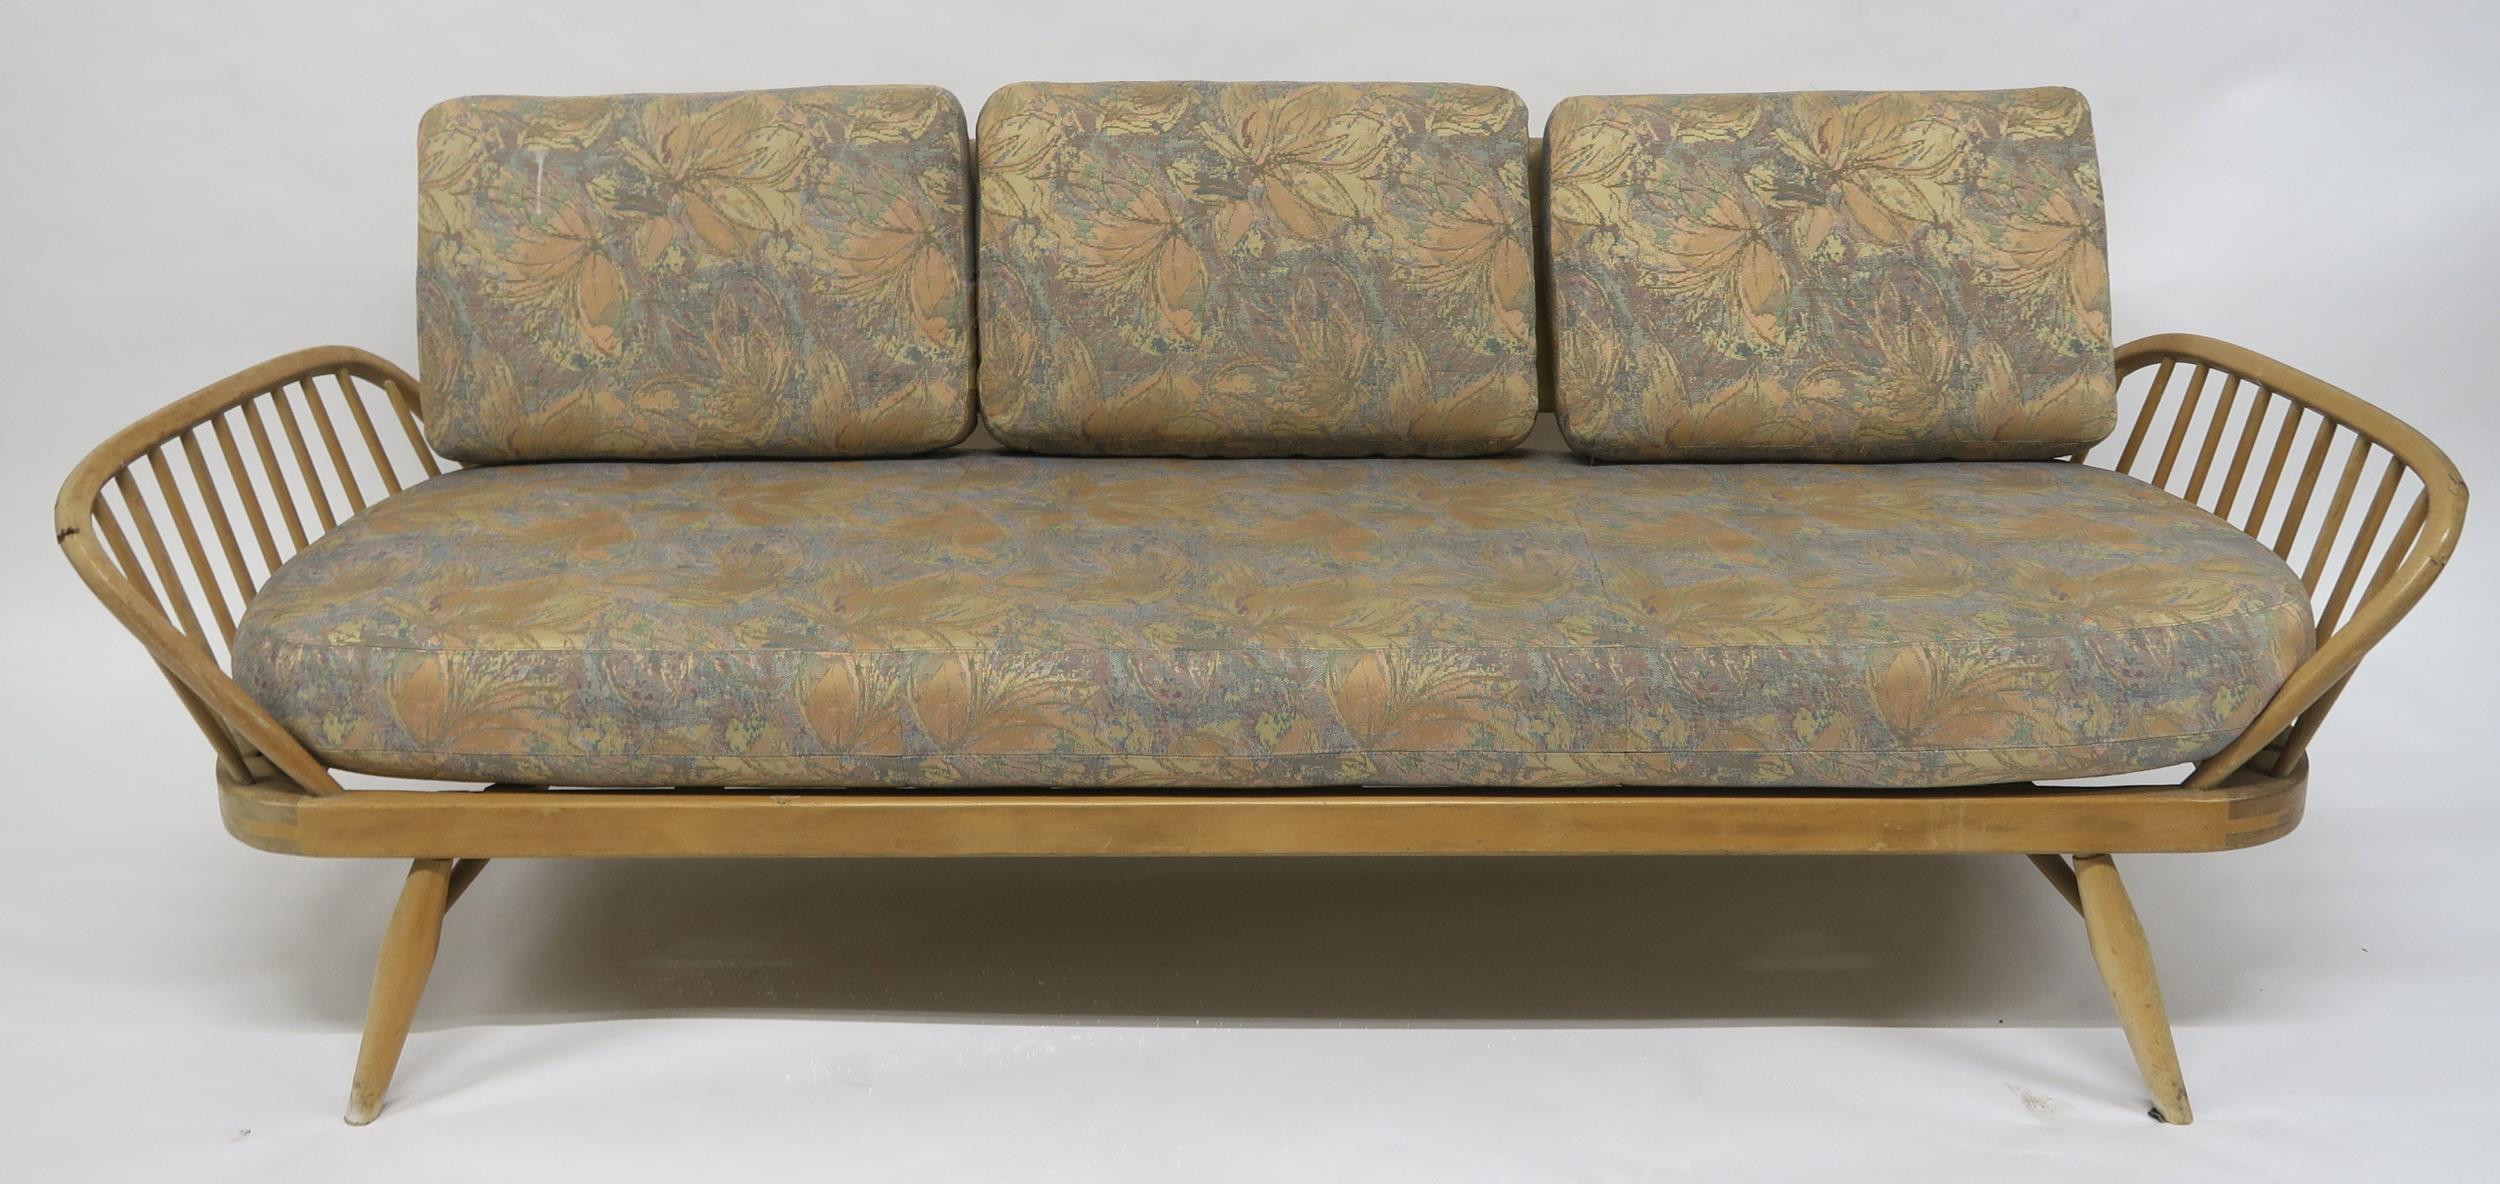 A MID 20TH CENTURY ELM AND BEECH FRAMED ERCOL DAY BED with floral upholstered cushions, 77cm high